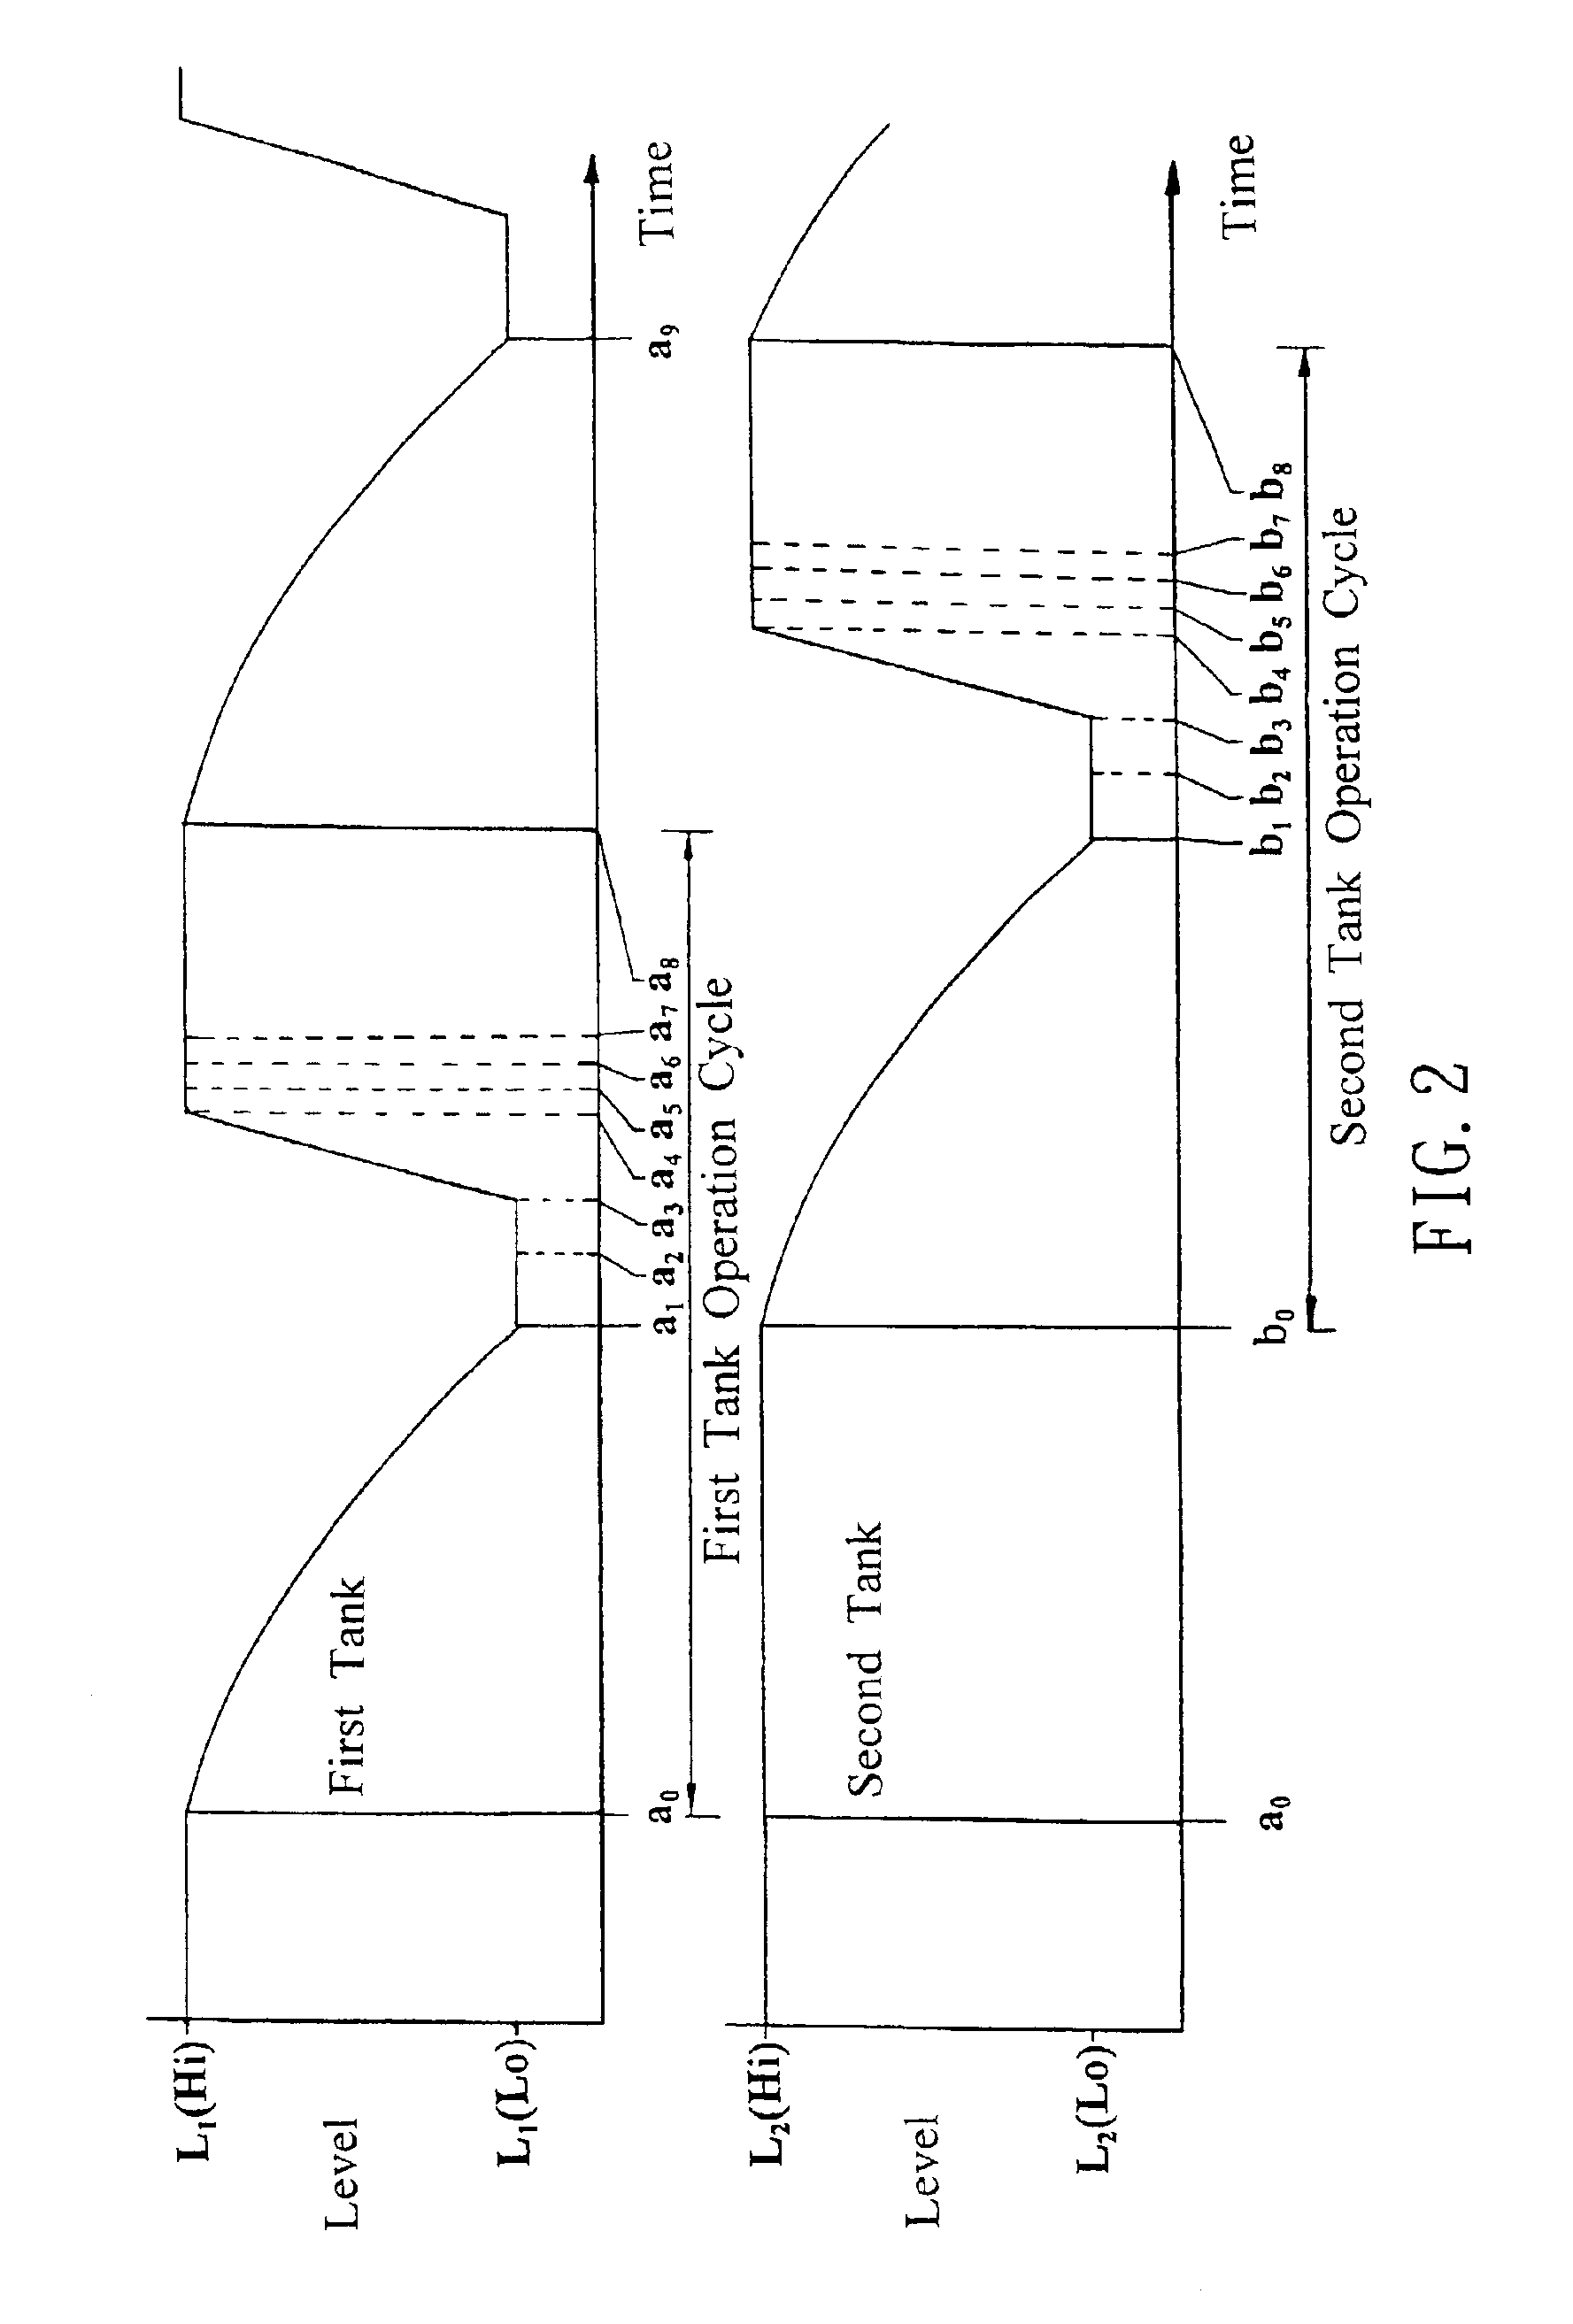 Multifunction passive and continuous fluid feeding system